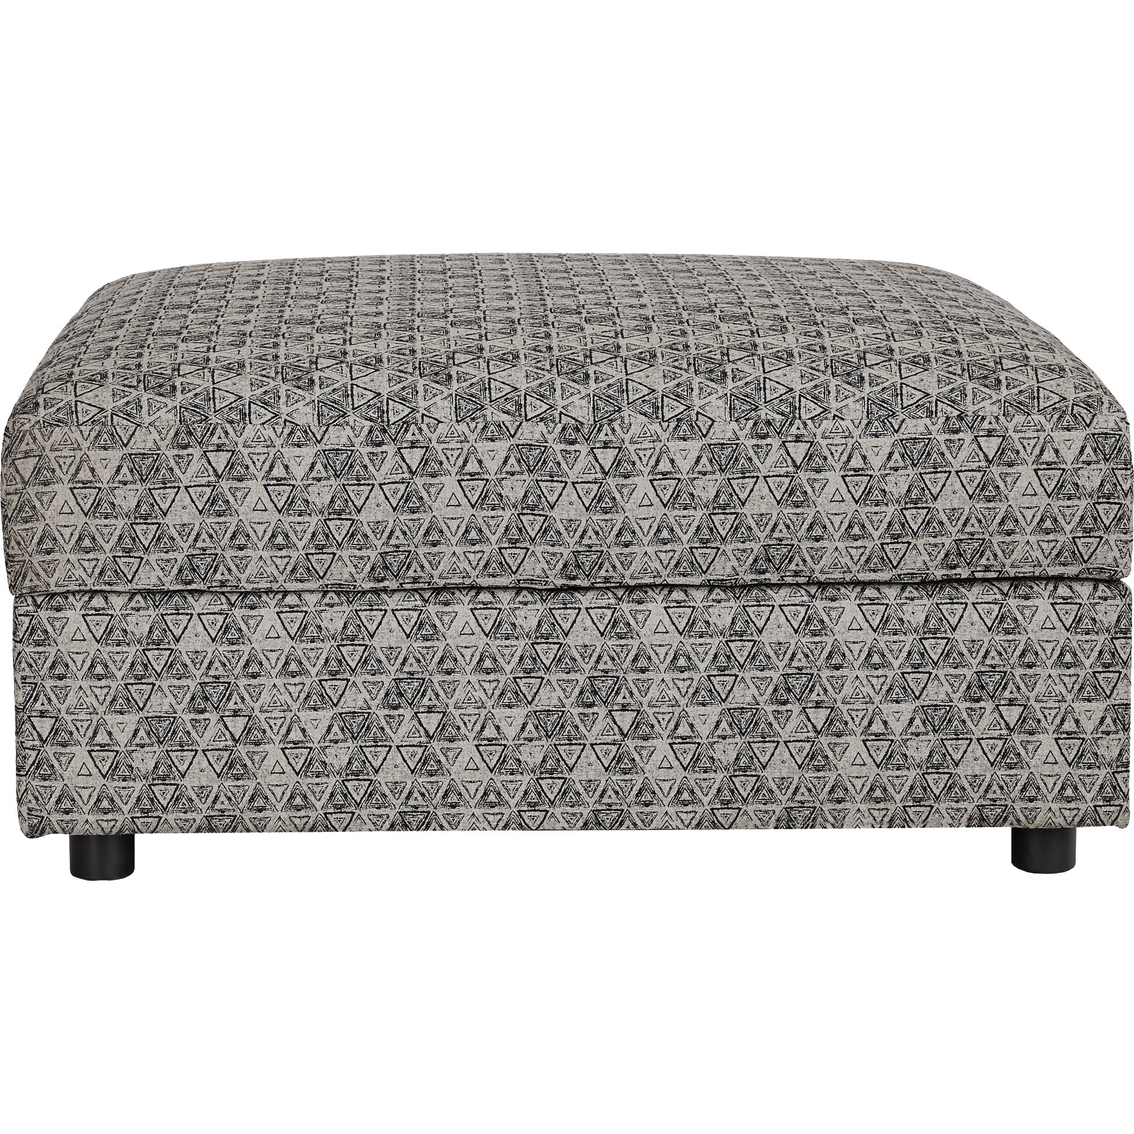 Signature Design by Ashley Kellway Ottoman with Storage - Image 4 of 4